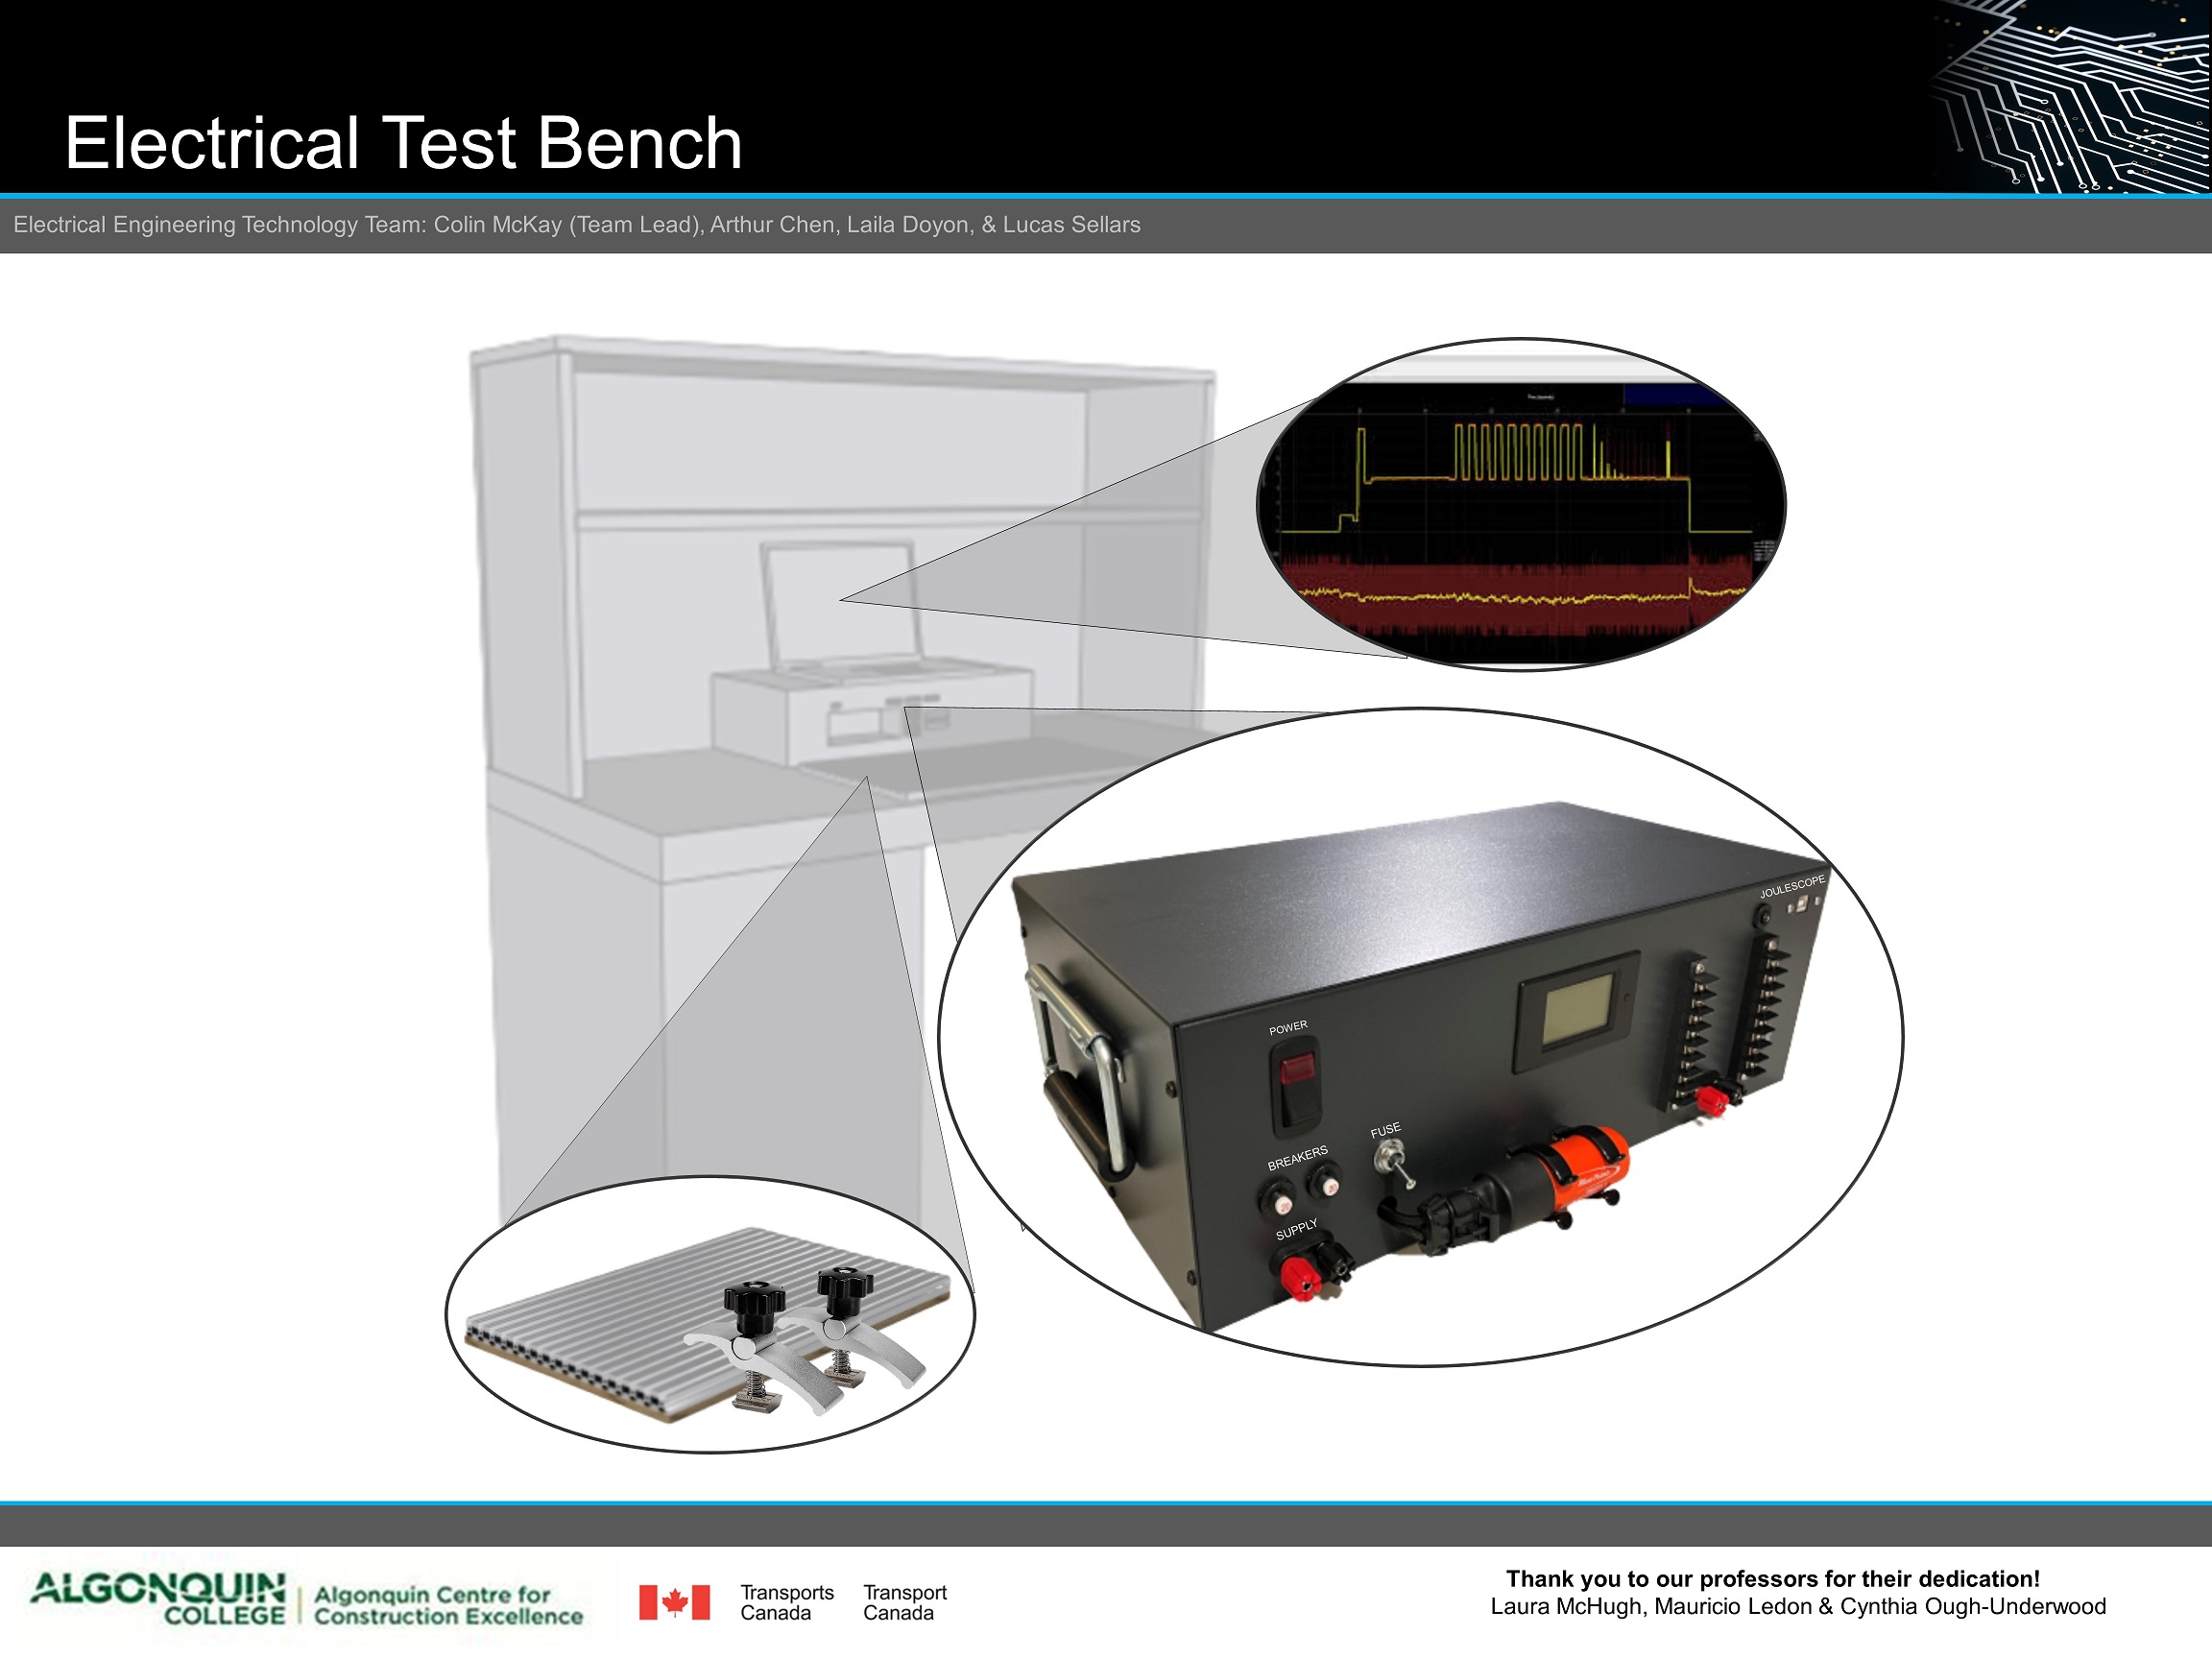 Electrical test bench with inset pictures of test unit, clamping system, and graphical output